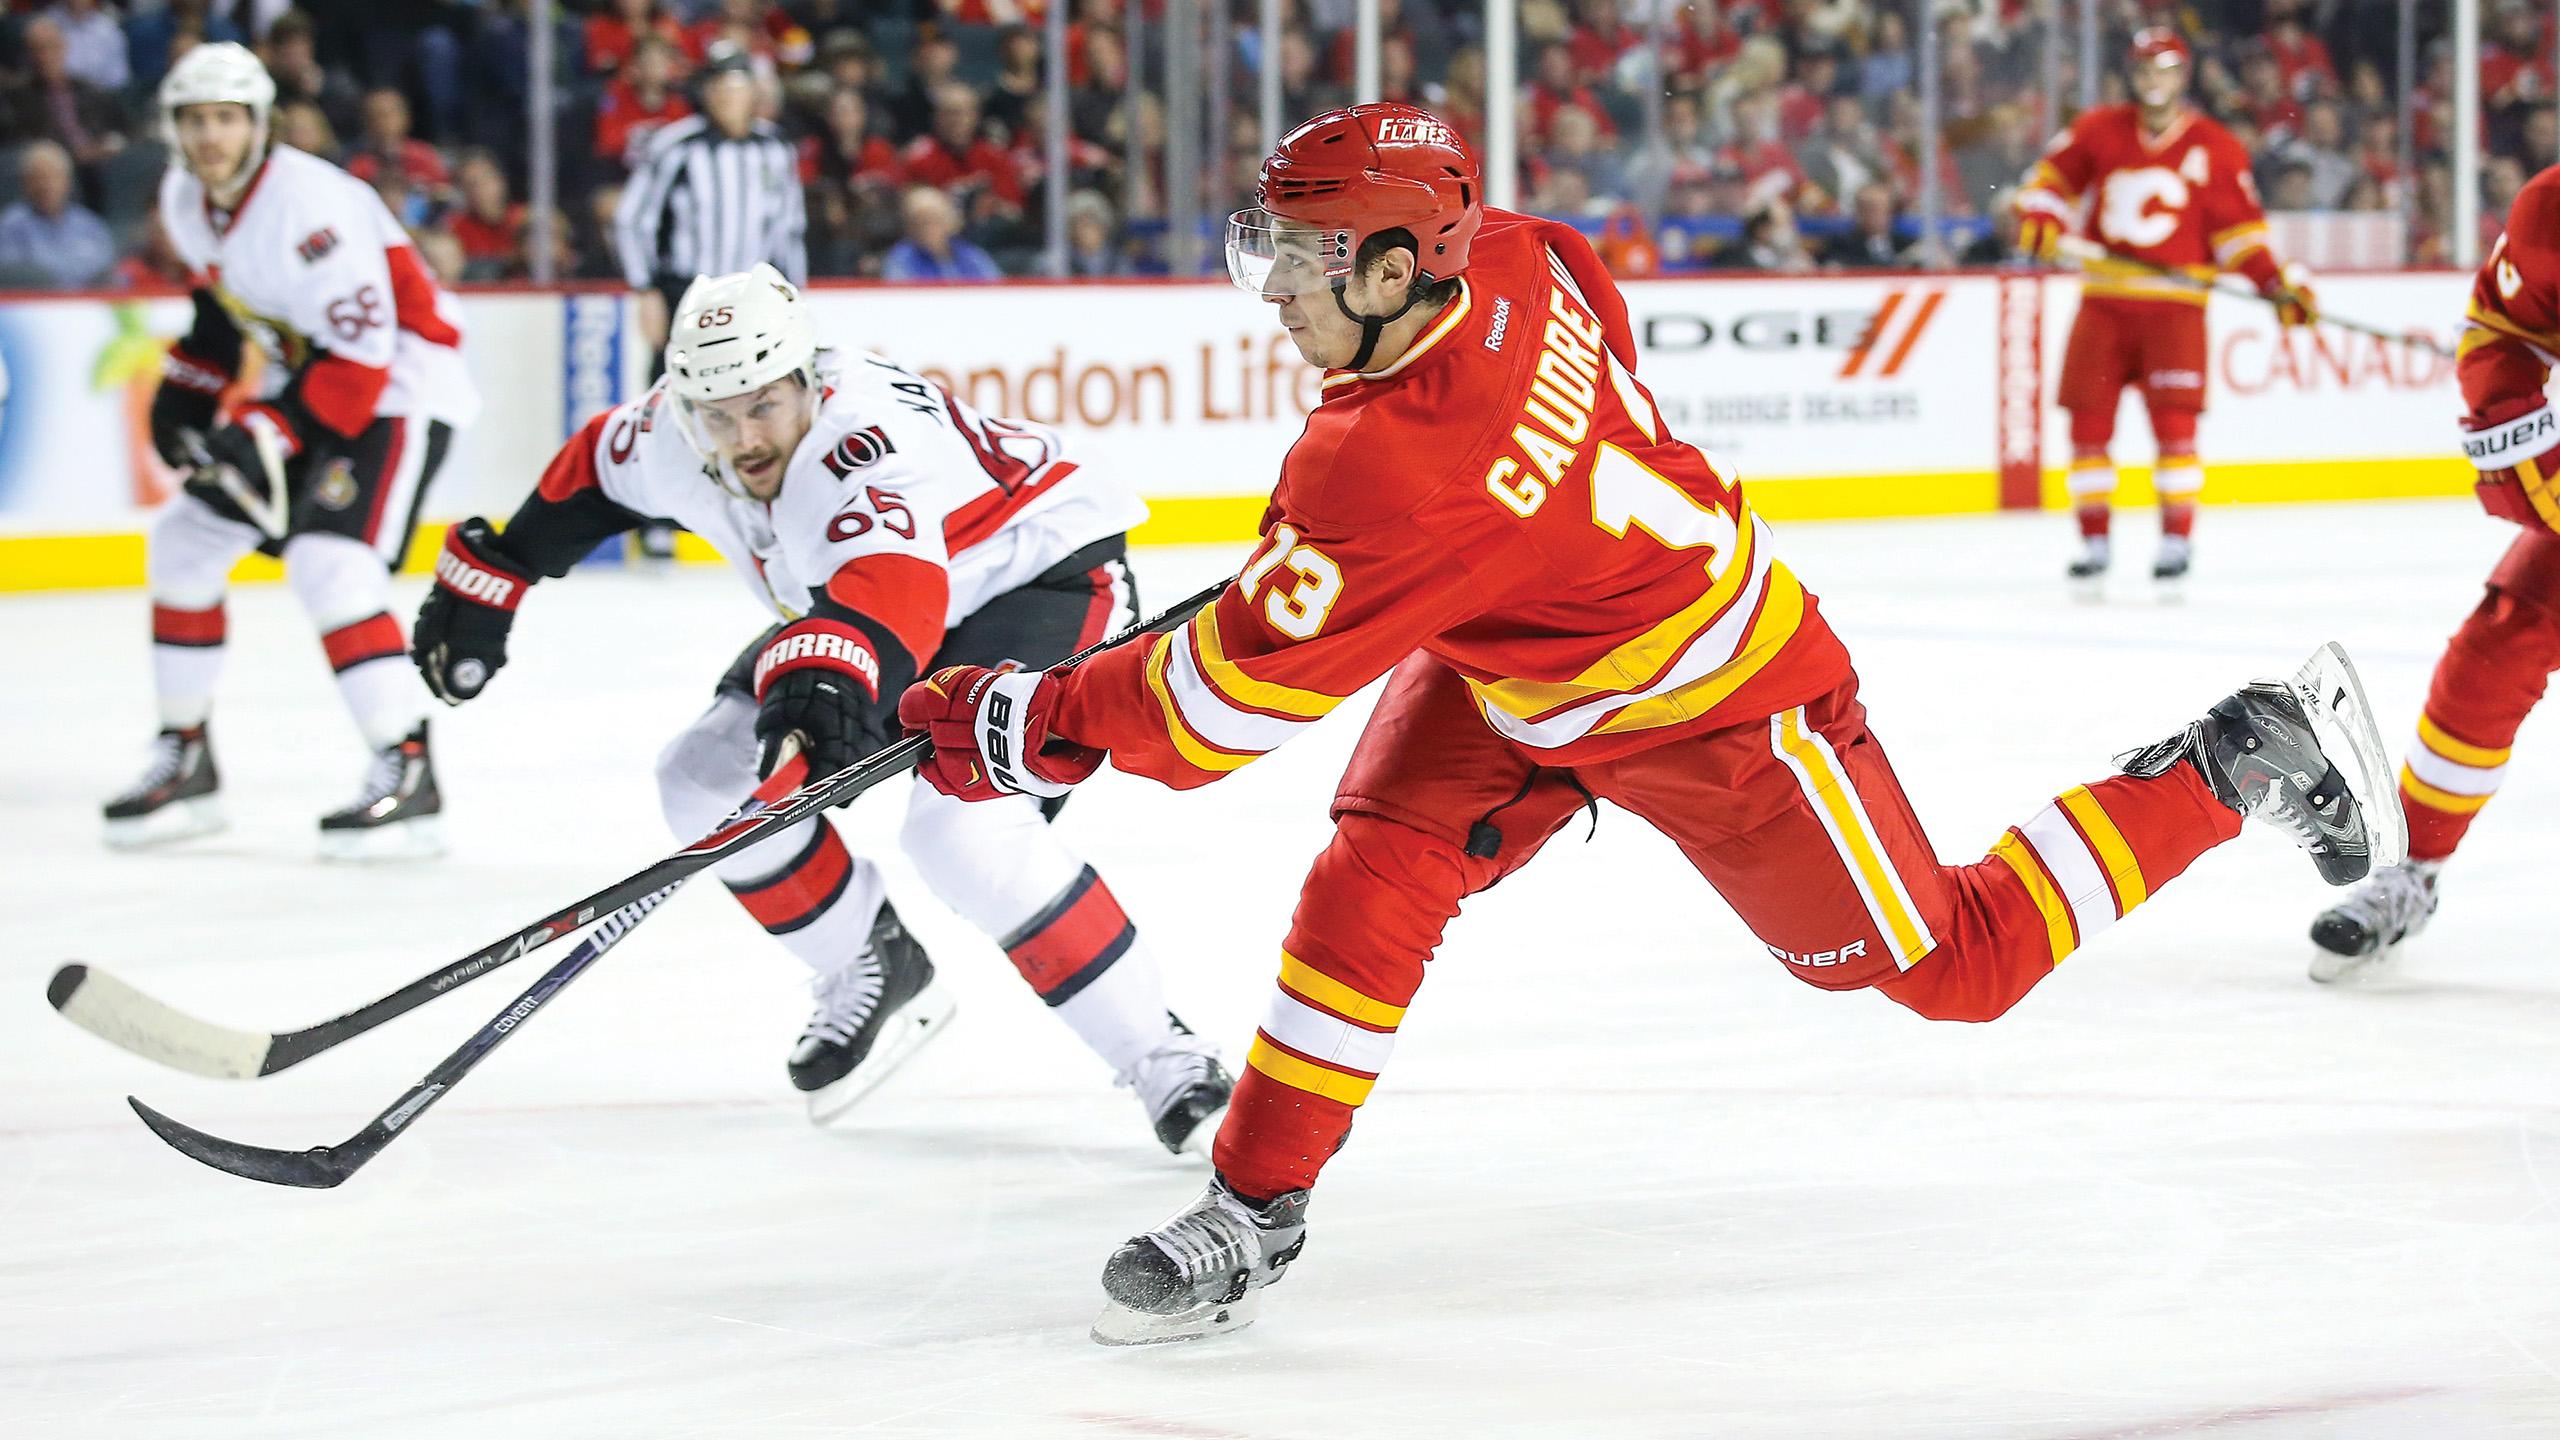 Gaudreau and Monahan: Calgary's opposite yet dynamic duo